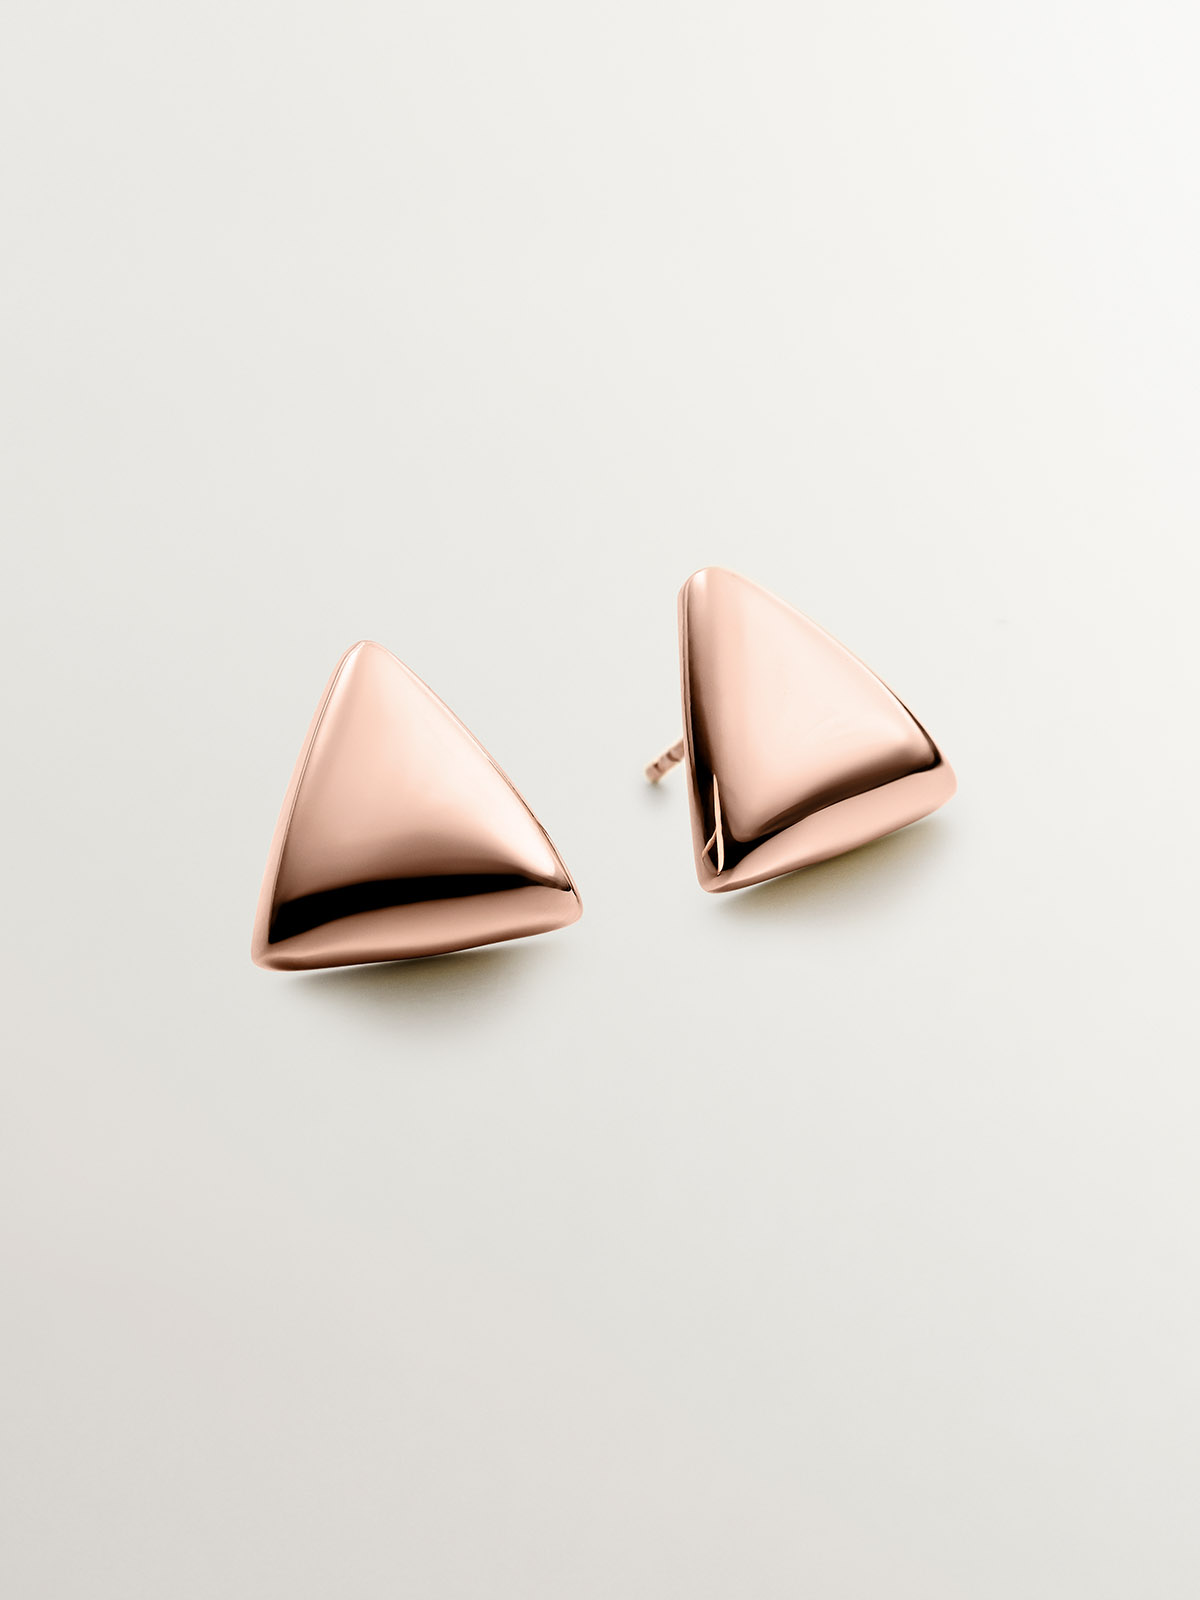 18K rose gold plated 925 silver earrings with triangular shape